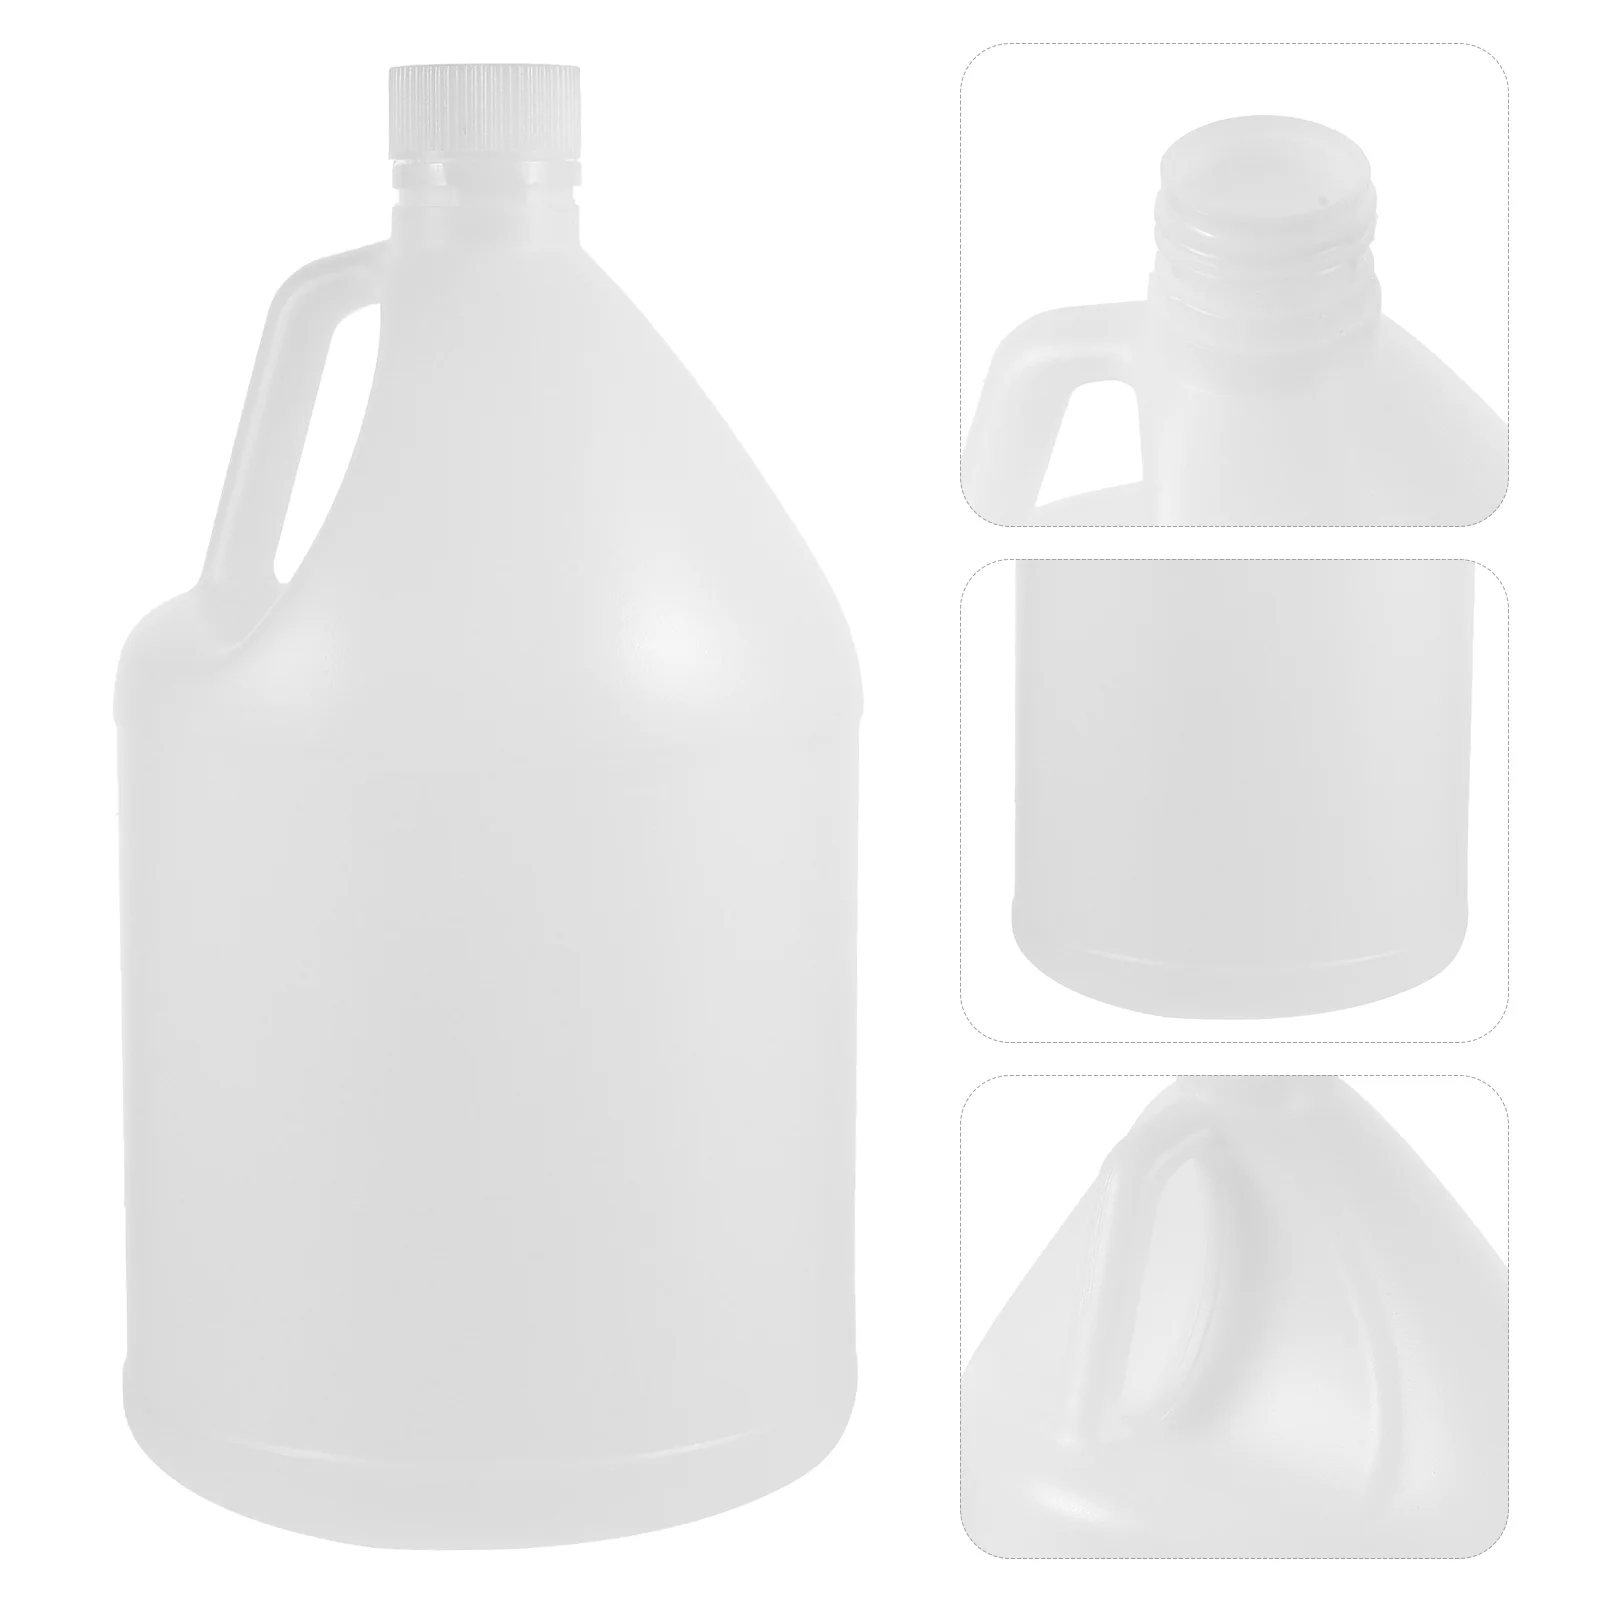 

Waterbottle Plastic Barrel White Jug Oil Container Handle 4 Liter Gallon Empty Large Capacity Kettle Hdpe Bucket With